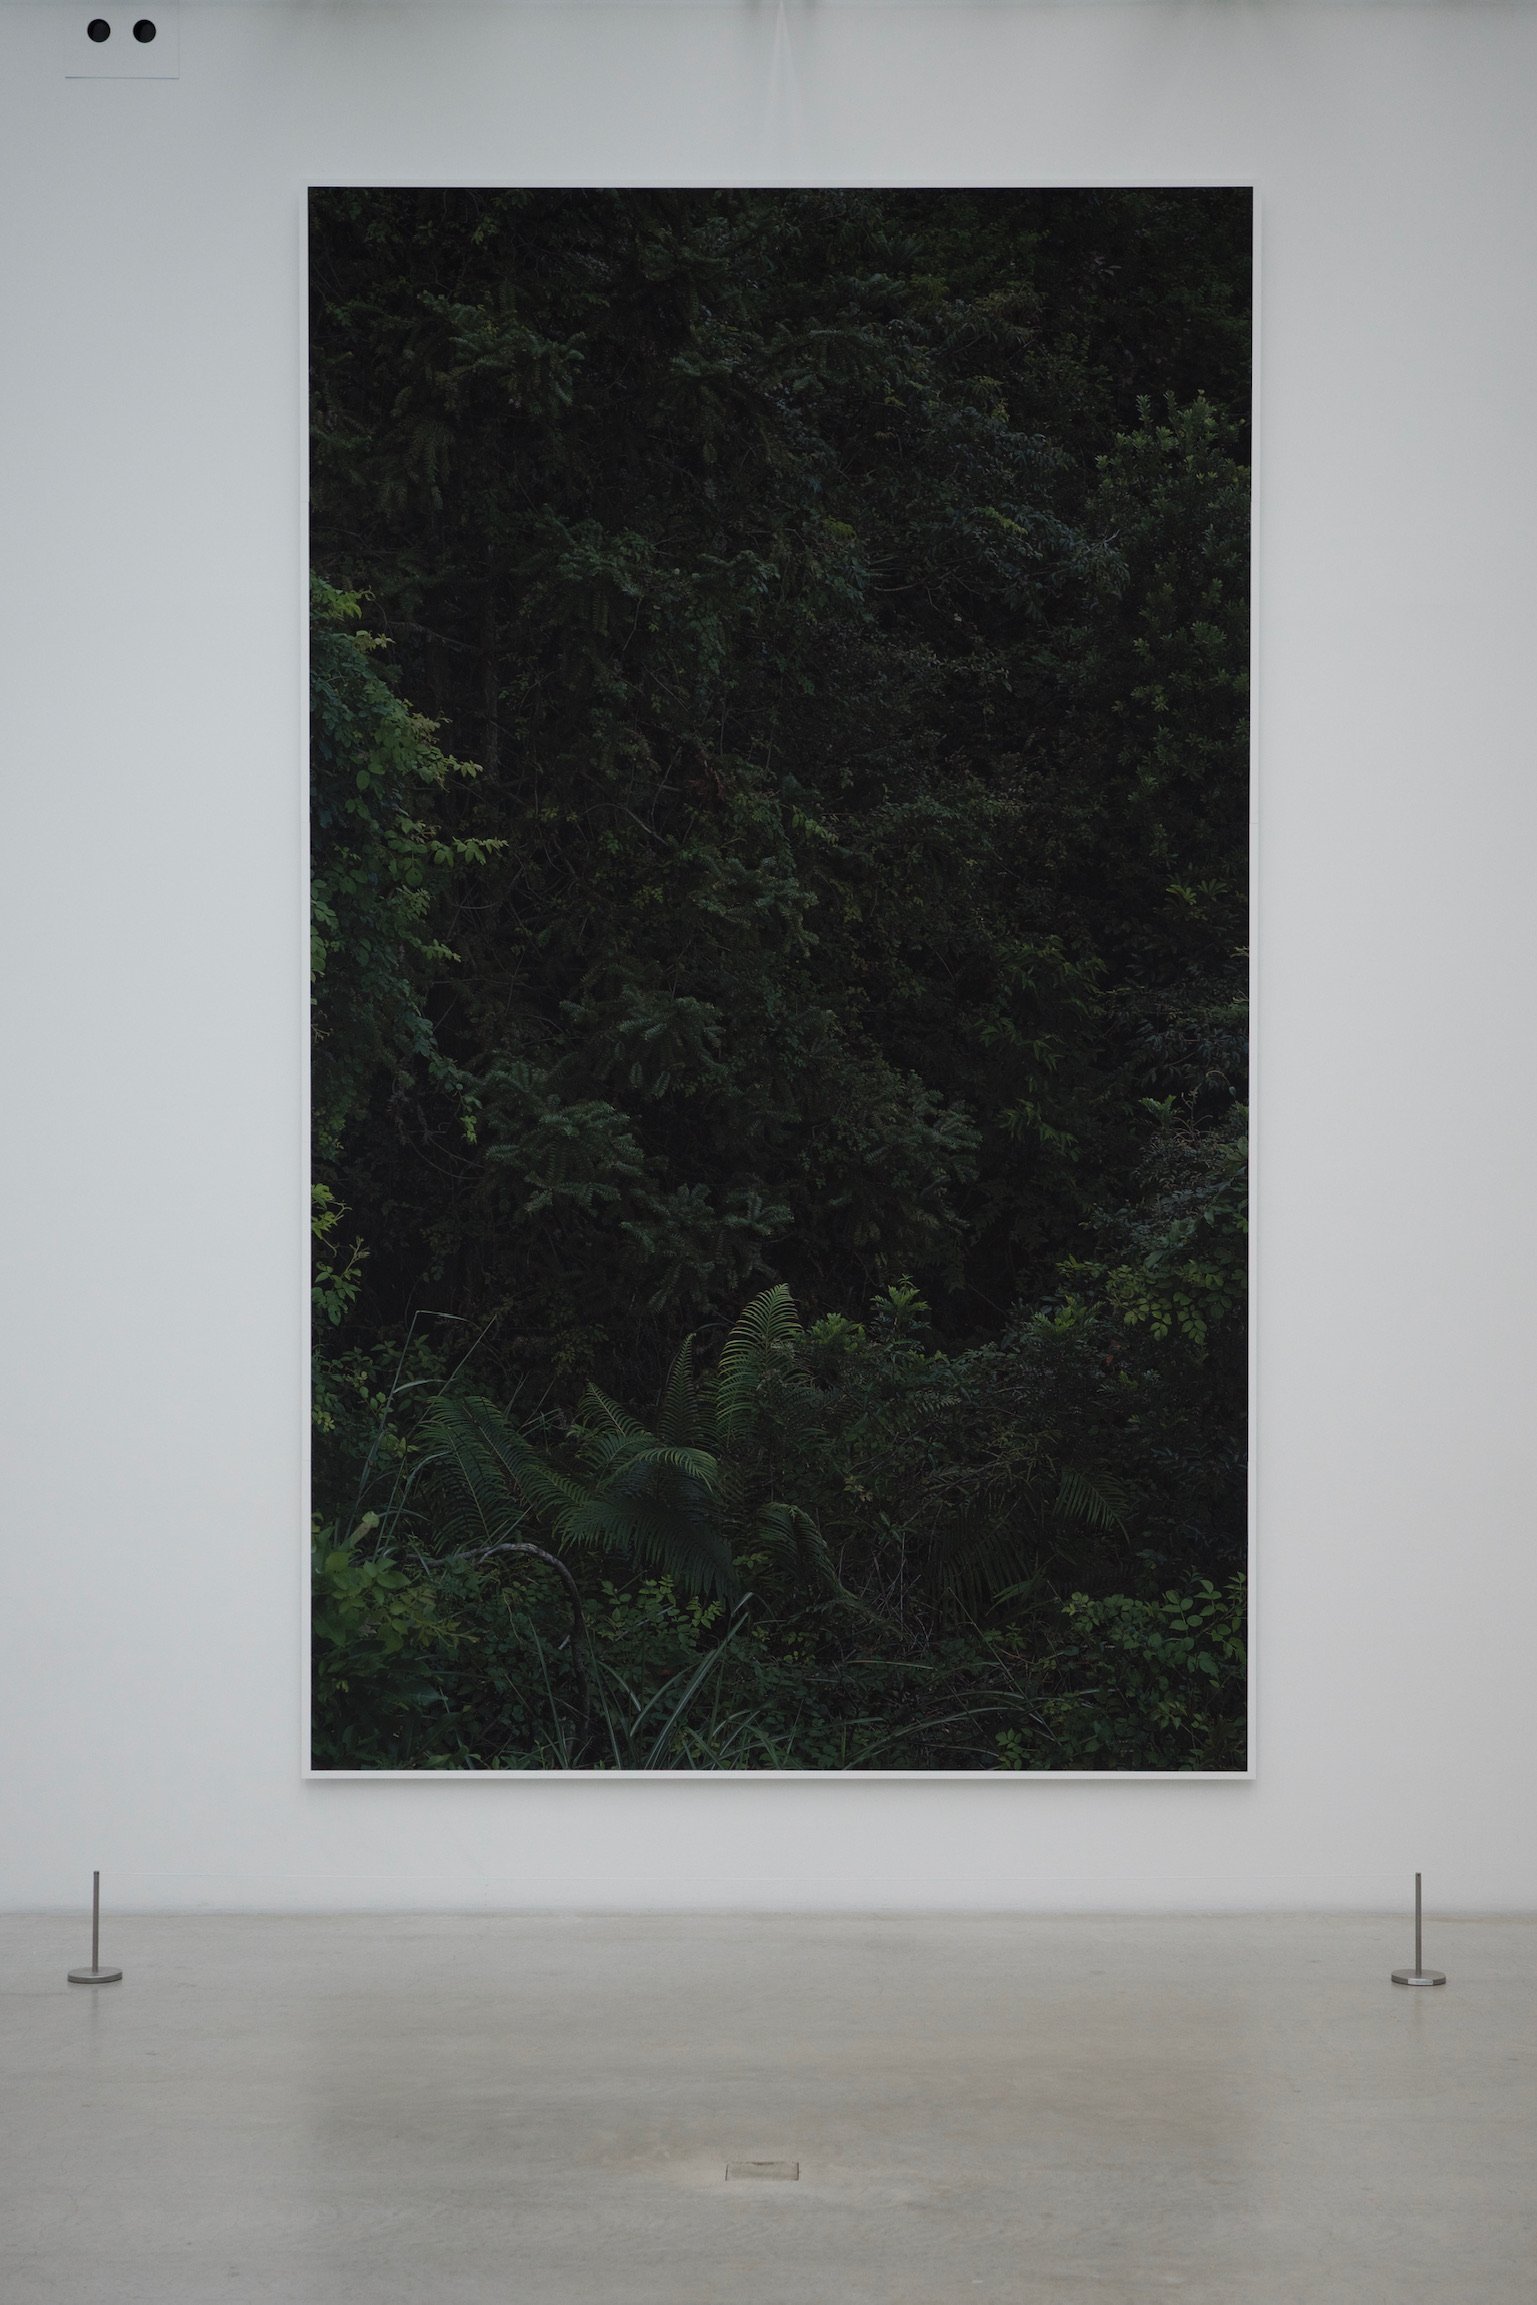 a large rectangular frame with trees in the background